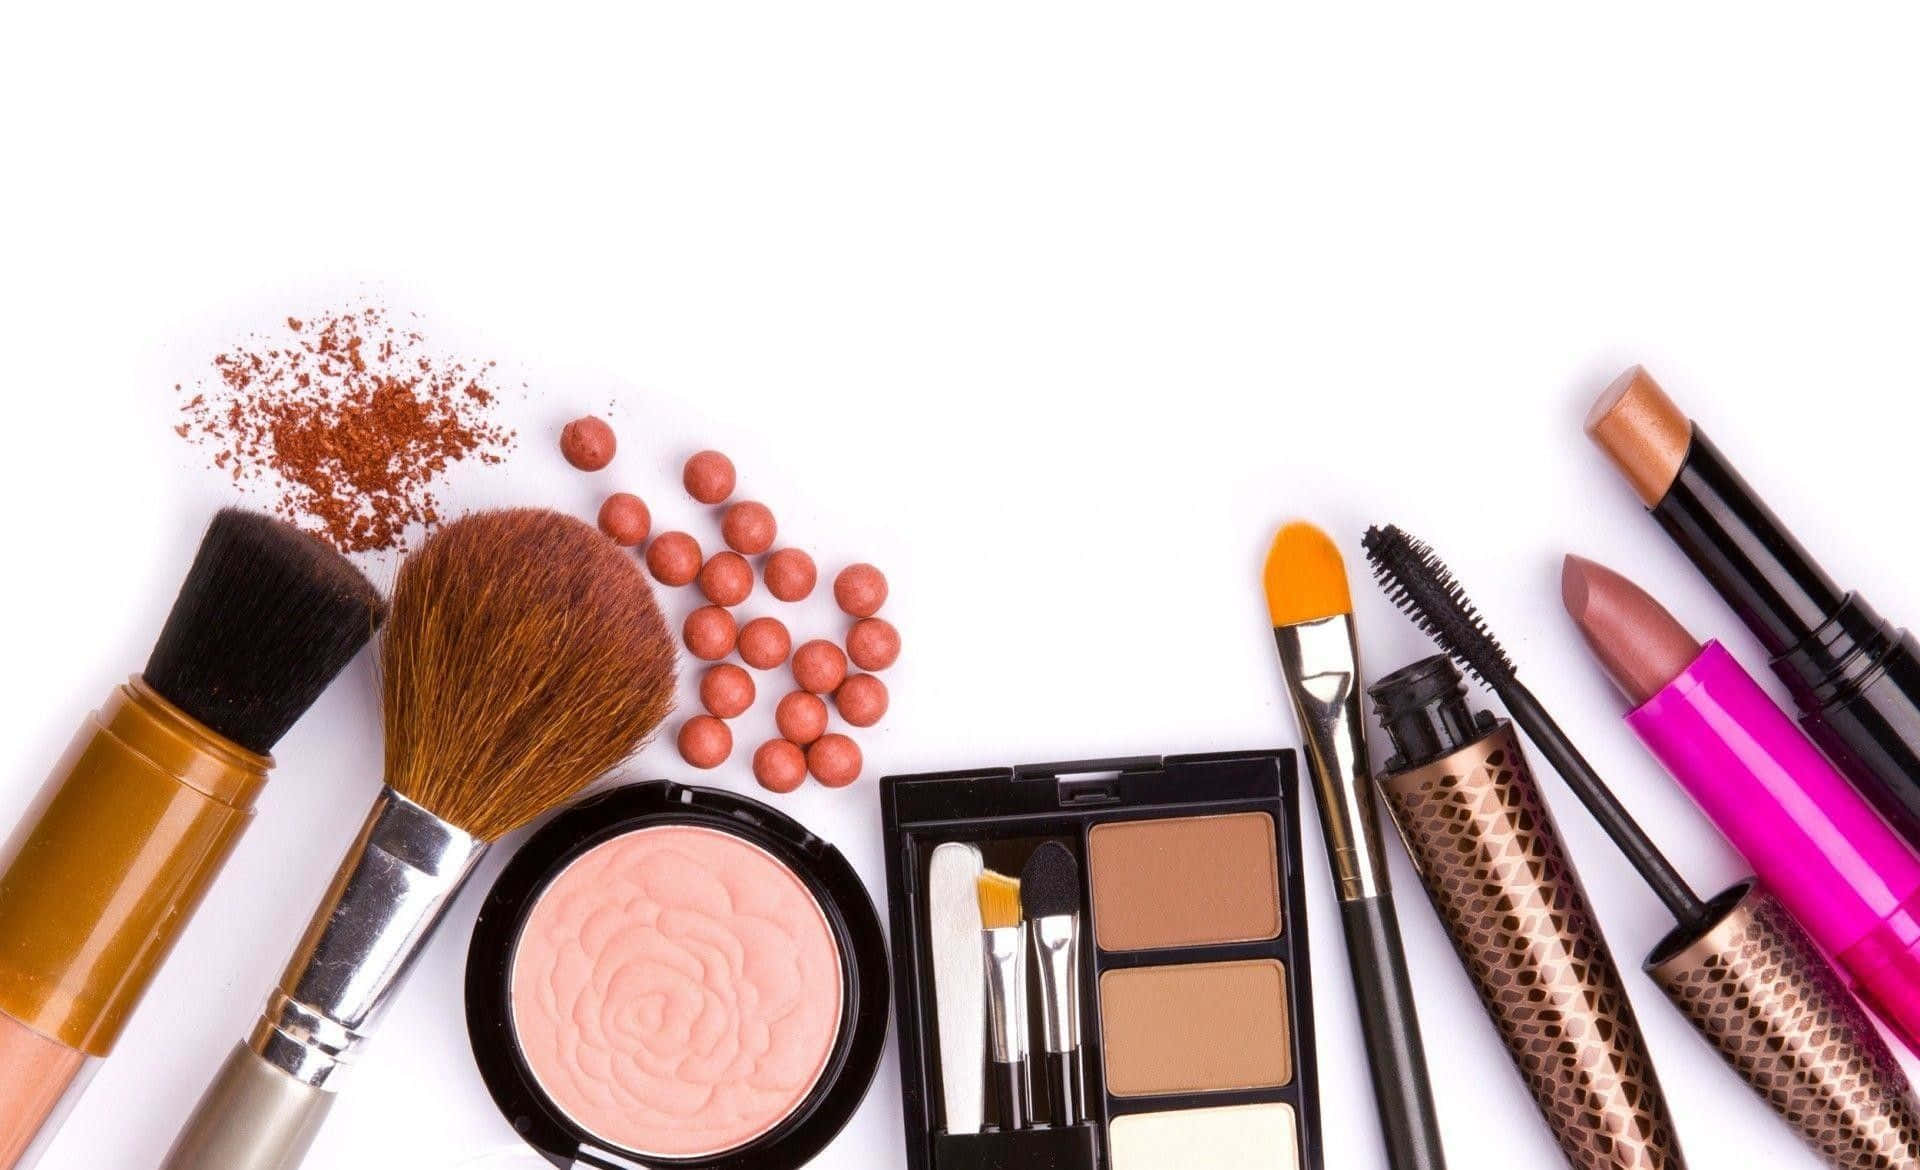 Get glam and gain confidence with the right cosmetics